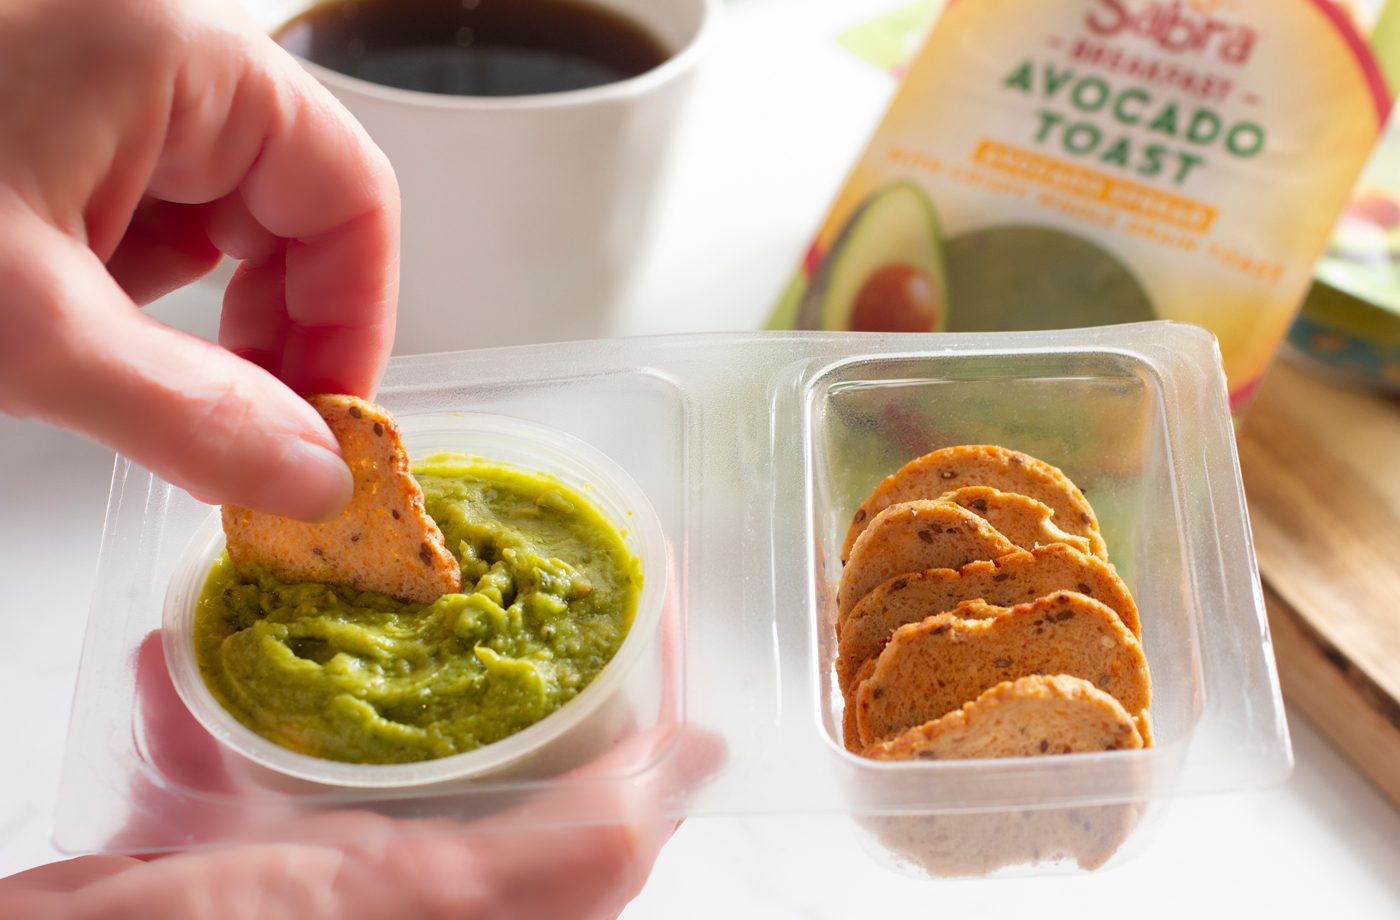 This grab-and-go avocado toast is an adult Millennial's answer to a Lunchable